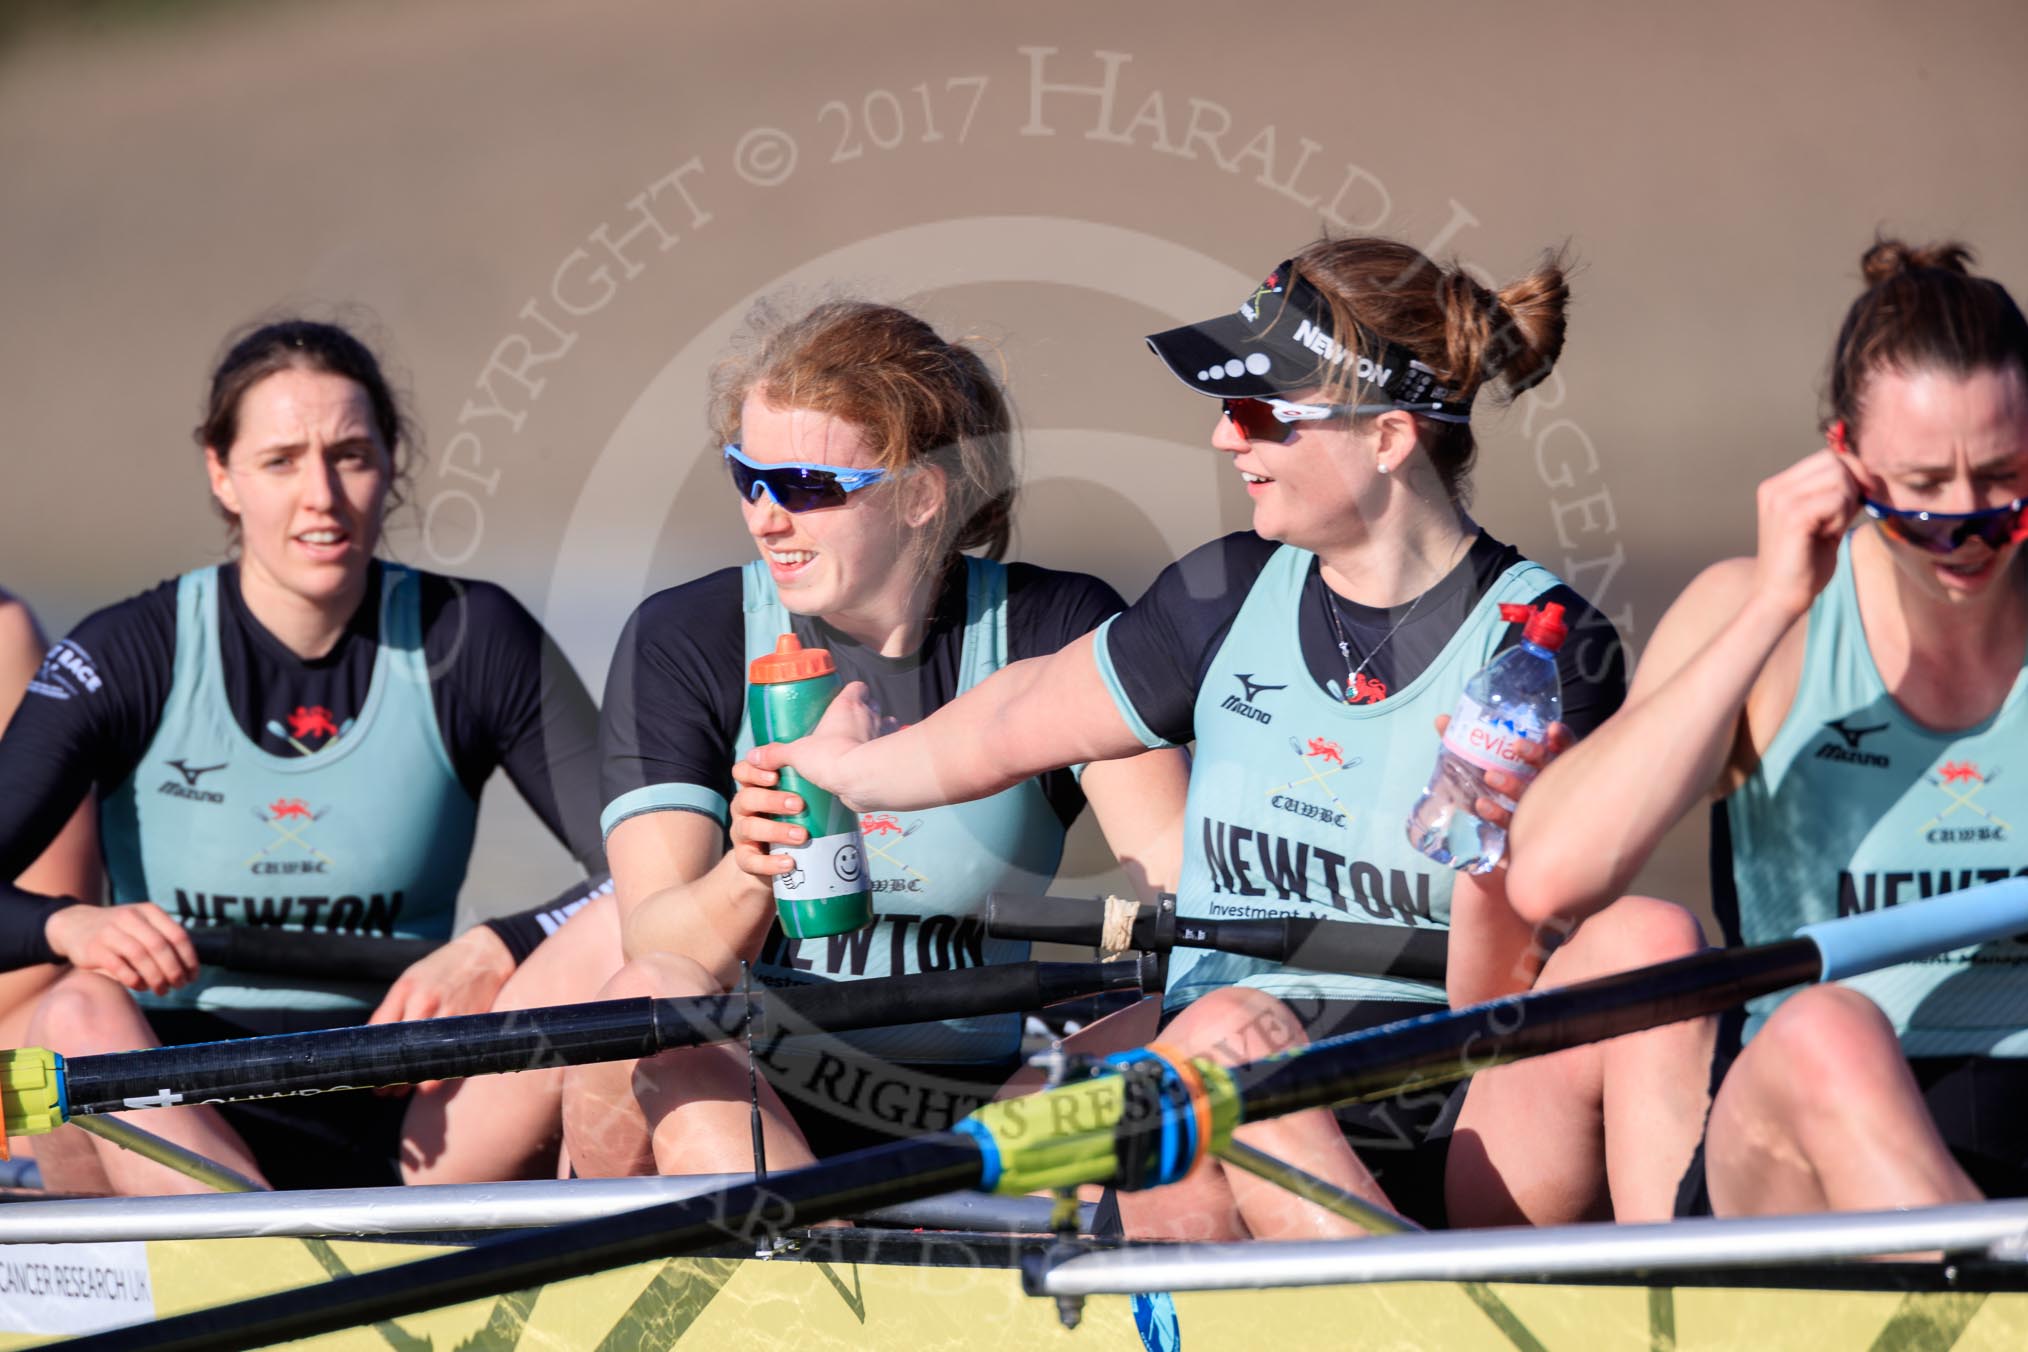 The Women's Boat Race season 2018 - fixture CUWBC vs. ULBC: OUWBC, the winner of both parts of the fixture - 5 Thea Zabell, 6 Anne Beenken, 7 Imogen Grant, stroke Tricia Smith.
River Thames between Putney Bridge and Mortlake,
London SW15,

United Kingdom,
on 17 February 2018 at 13:36, image #181